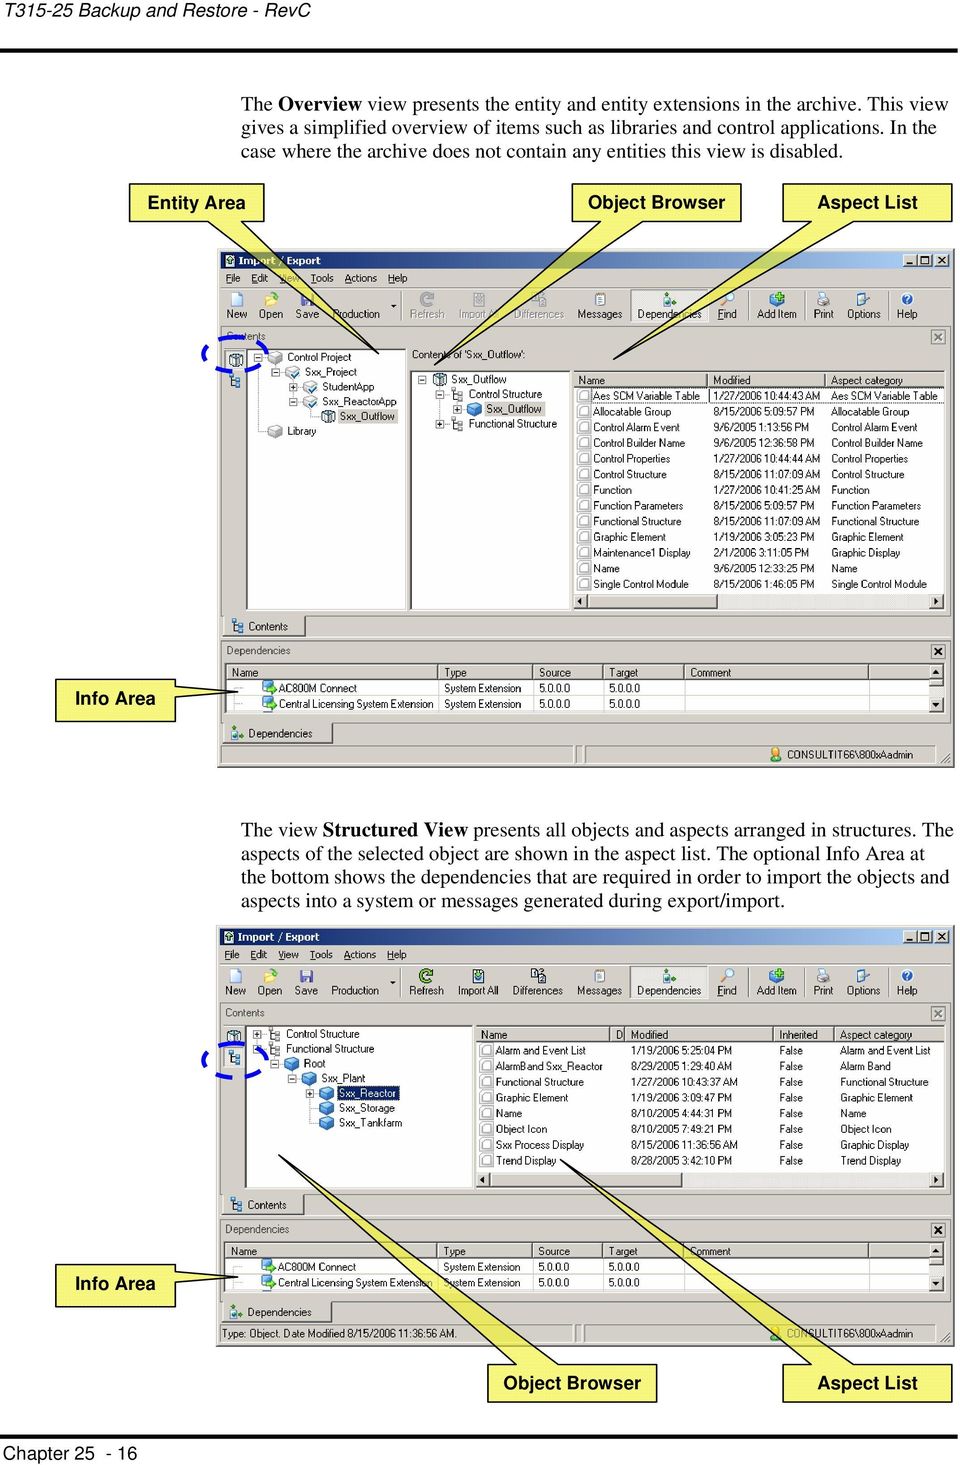 Entity Area Object Browser Aspect List Info Area The view Structured View presents all objects and aspects arranged in structures.